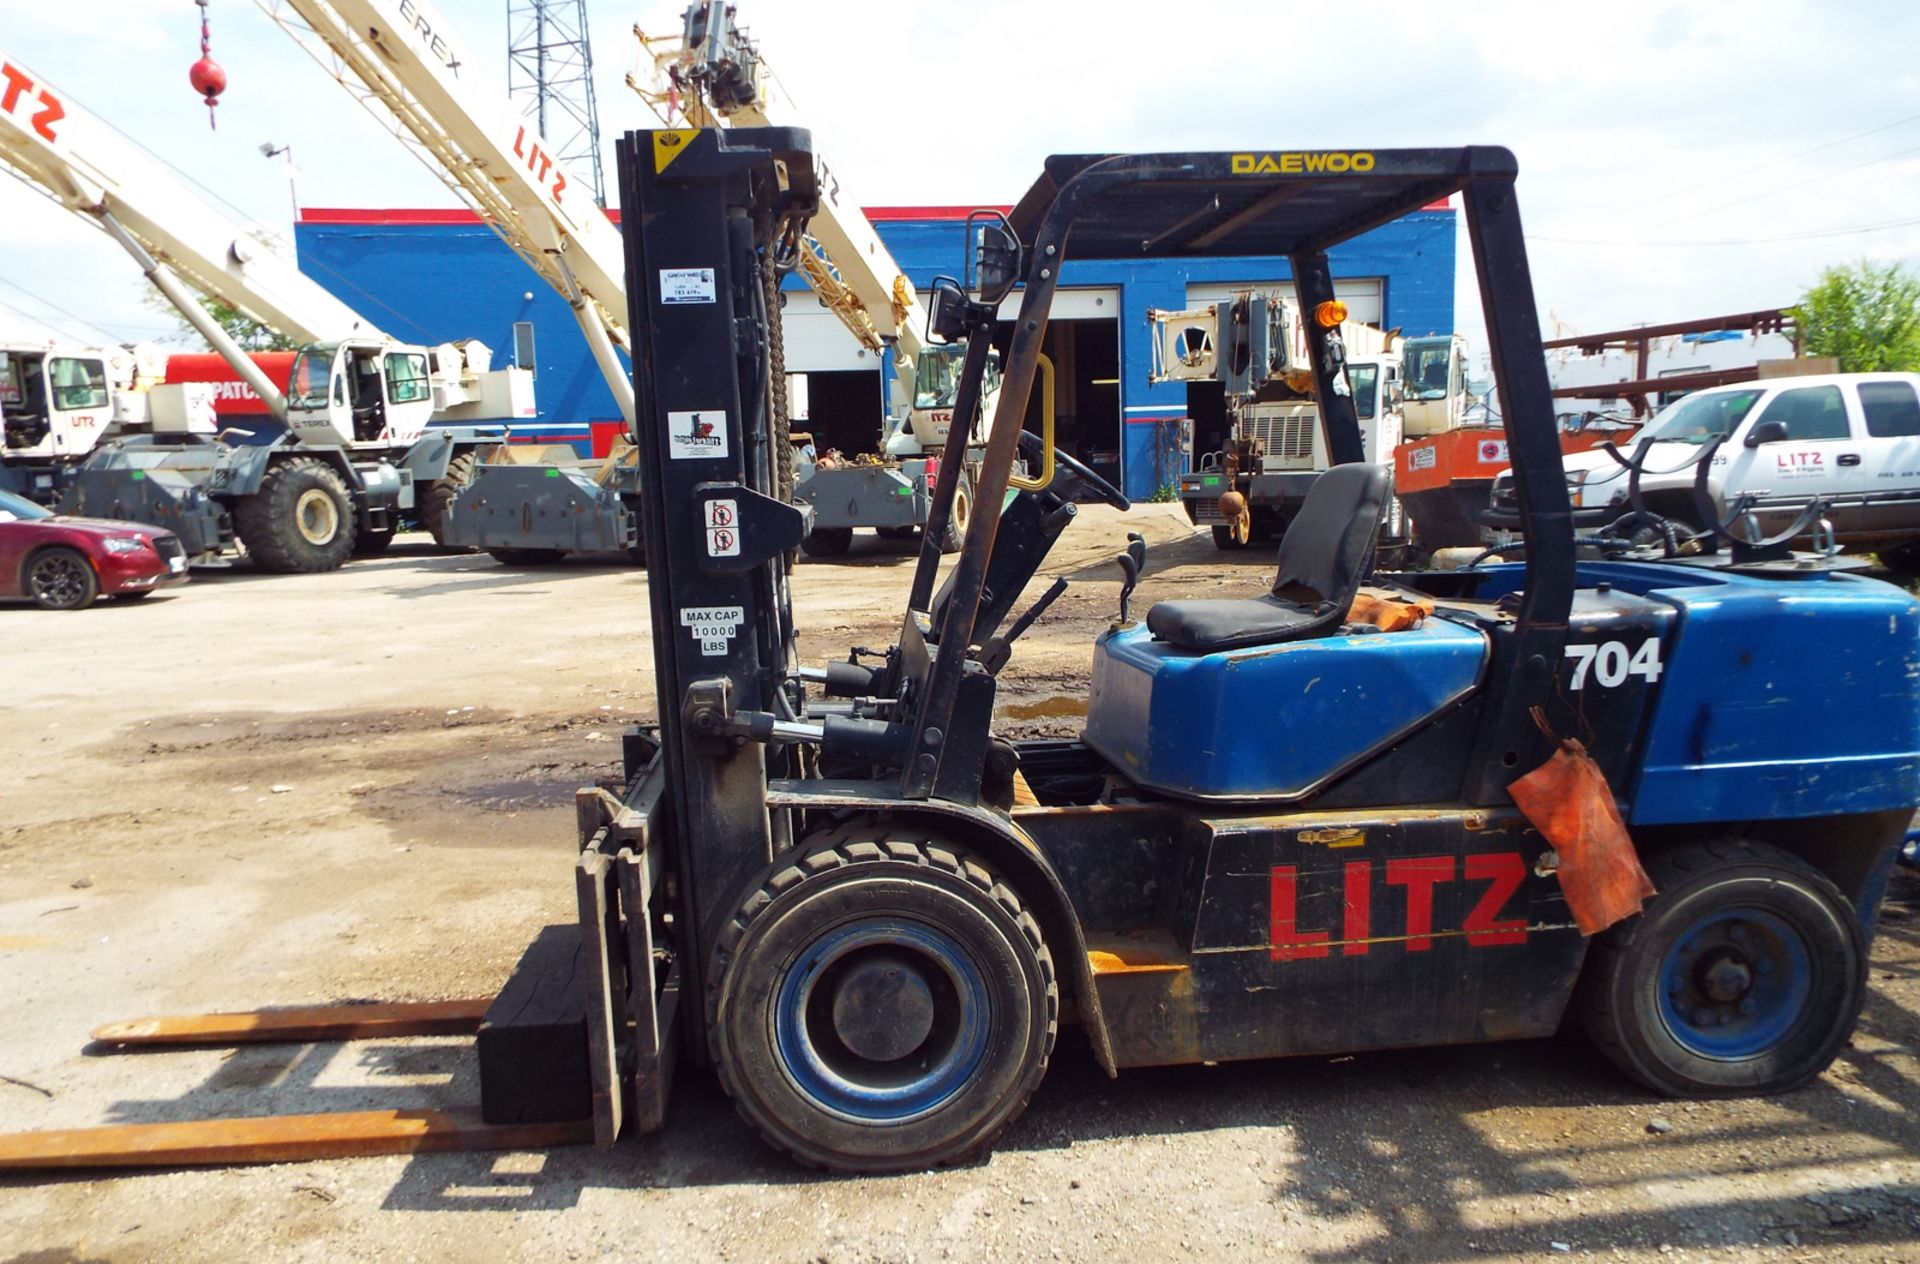 DAEWOO (2004) G455-2 FORKLIFT, PROPANE, PNEUMATIC TIRES, 8050 CAPACITY, 3-STAGE MAST, SIDE SHIFT, 5' - Image 2 of 5